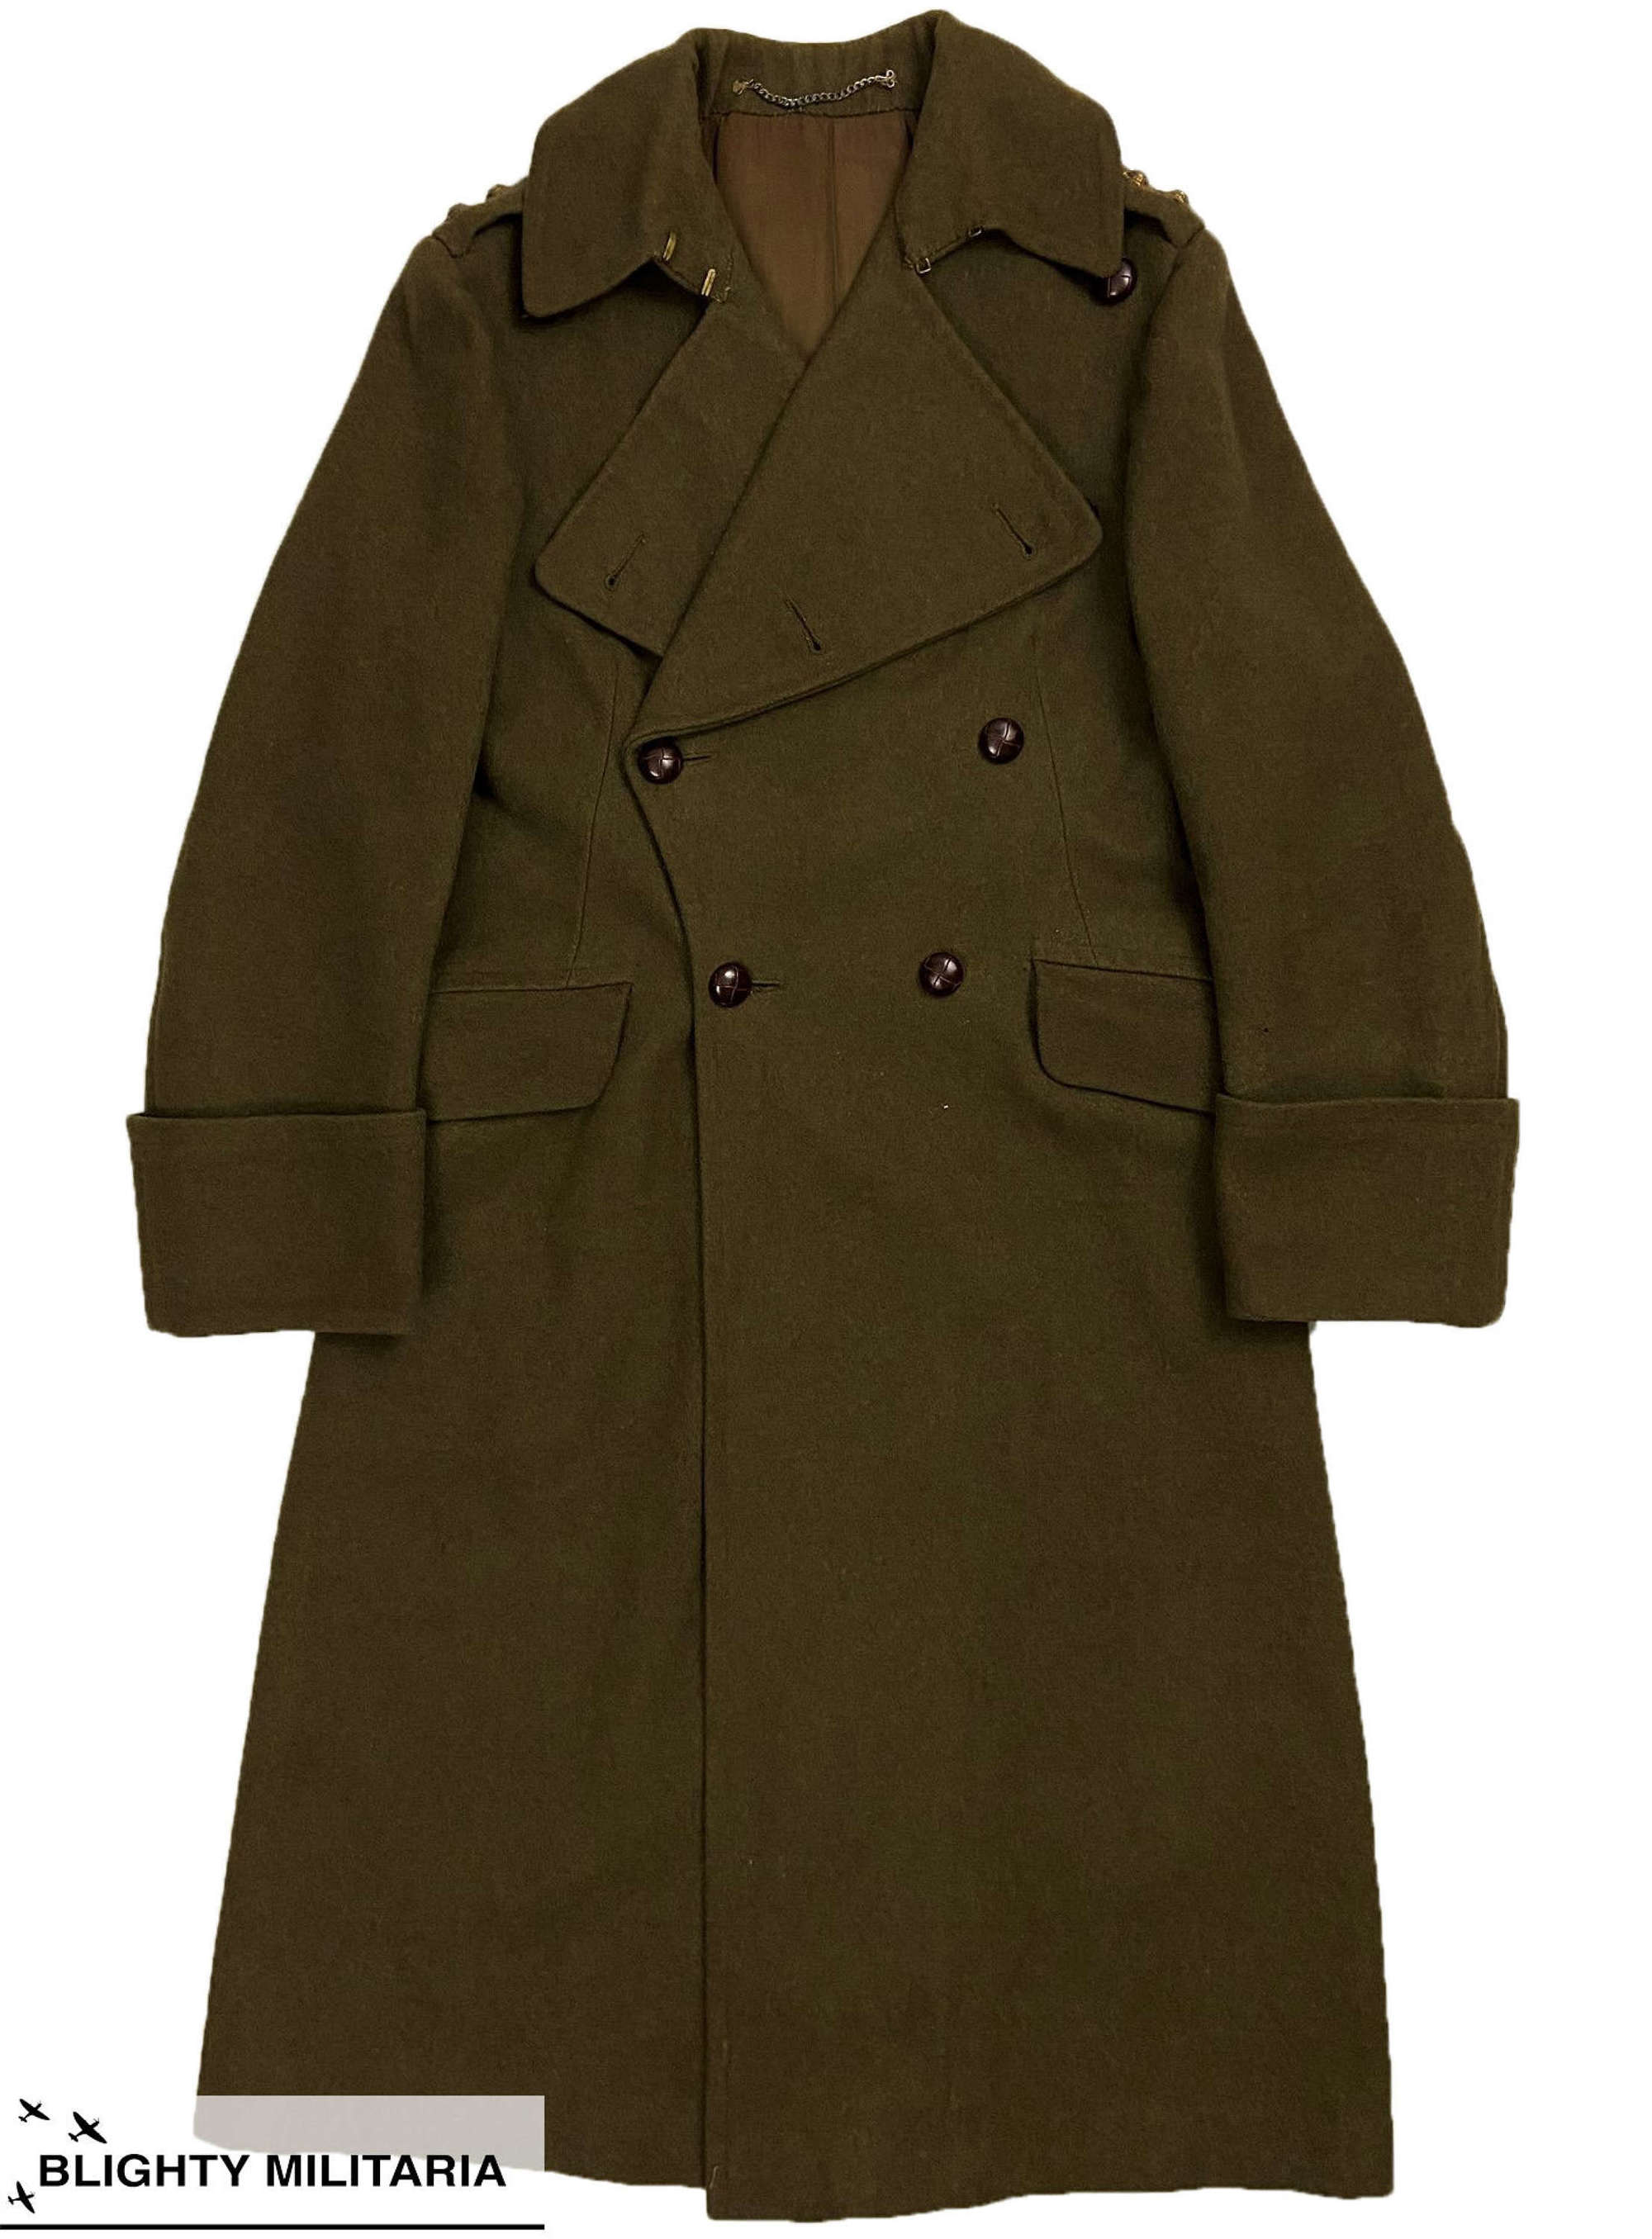 Original WW2 British Army Officers Greatcoat - Size 34